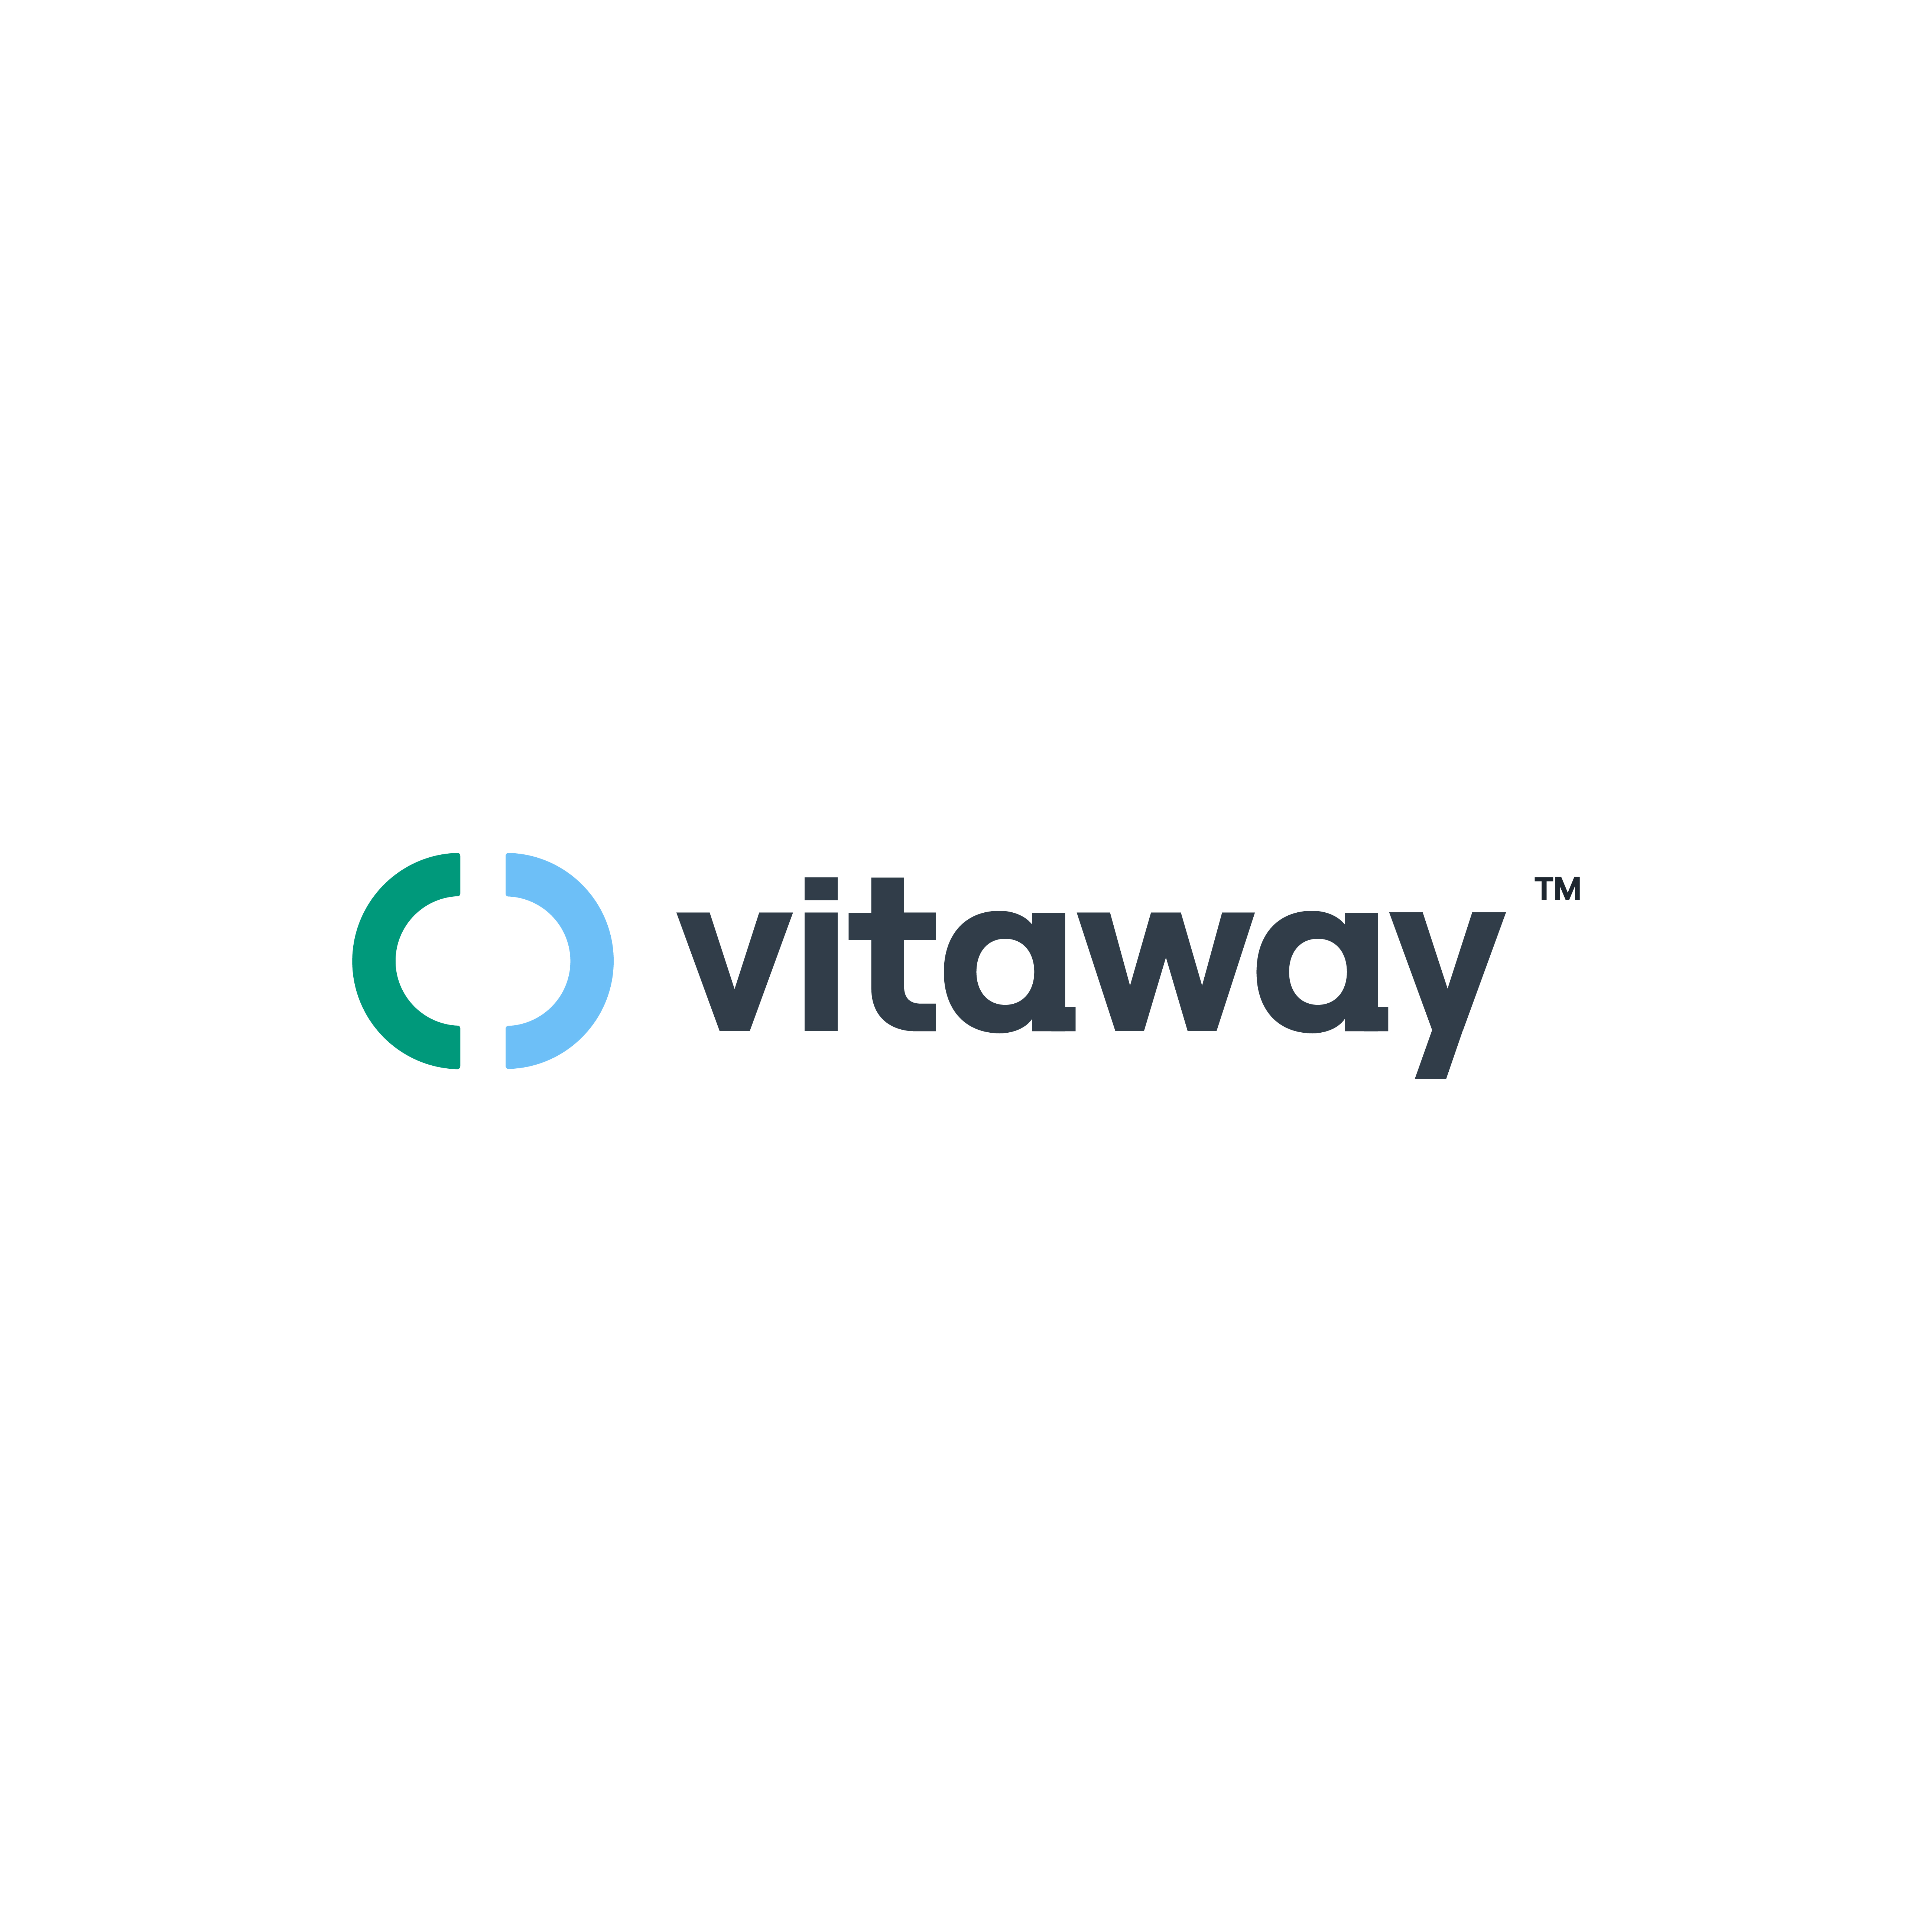 Visual Identity for Vitaway Created by Digital Factory